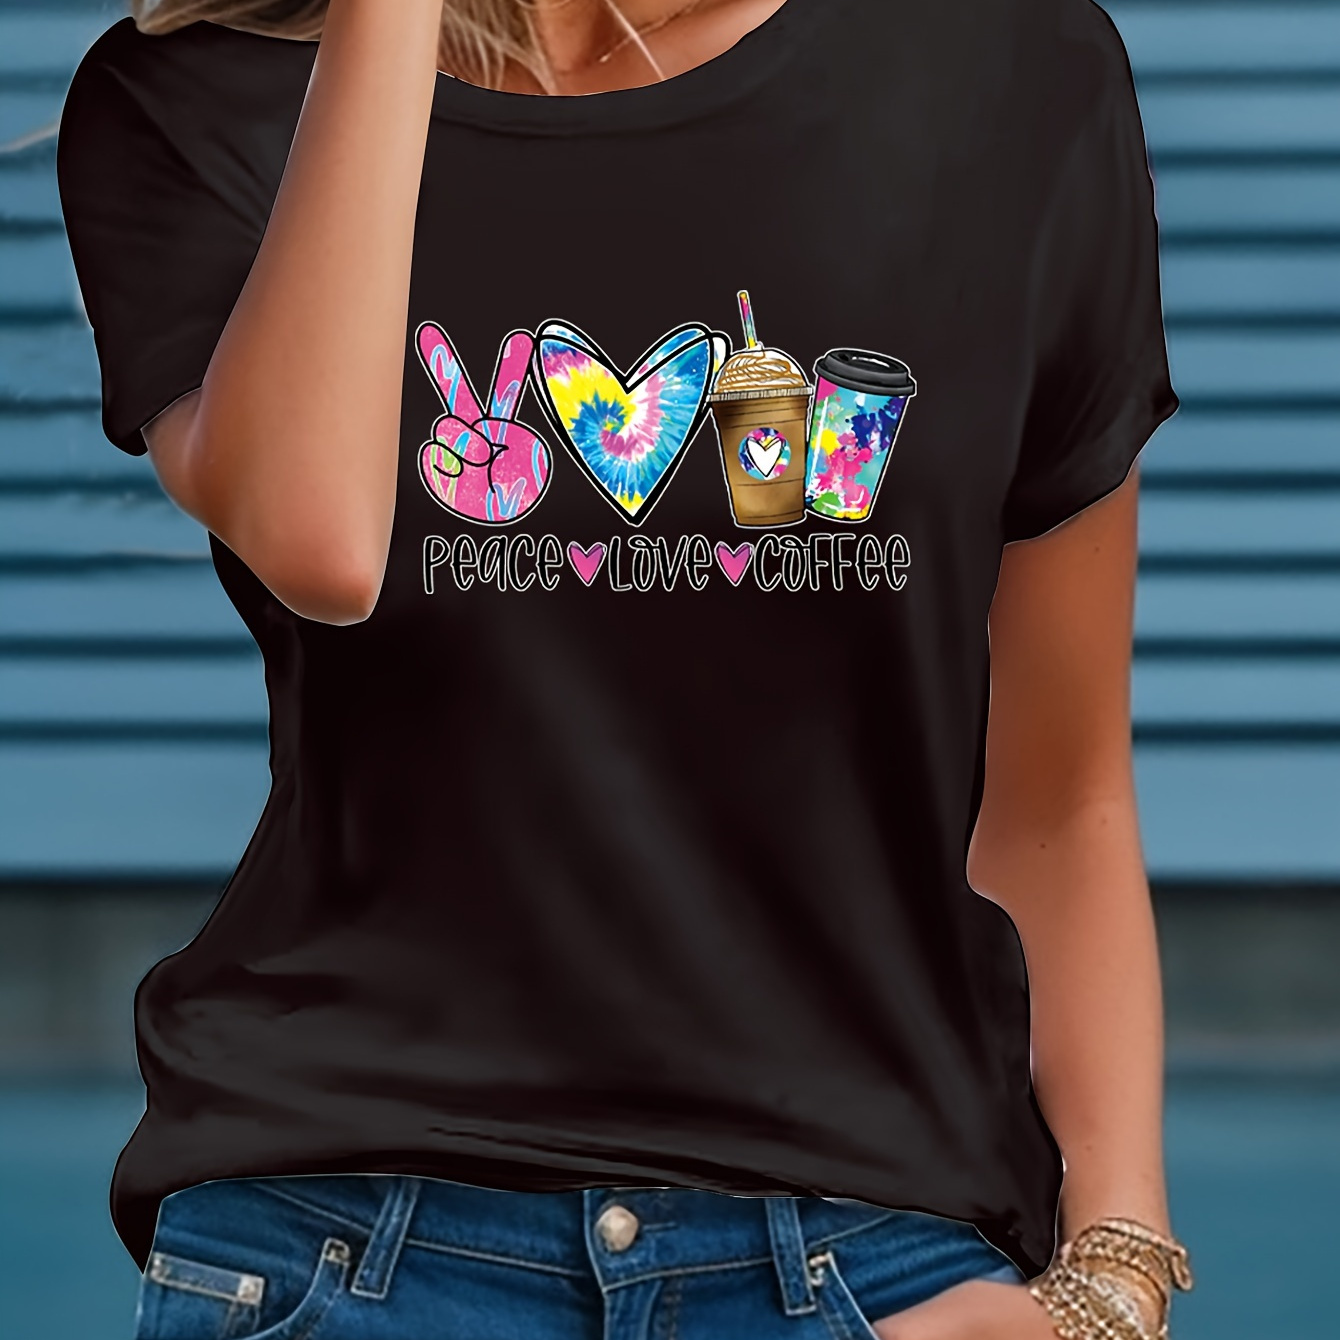 

Peace Love Coffee Letter Print T-shirt, Short Sleeve Crew Neck Casual Top For Summer & Spring, Women's Clothing